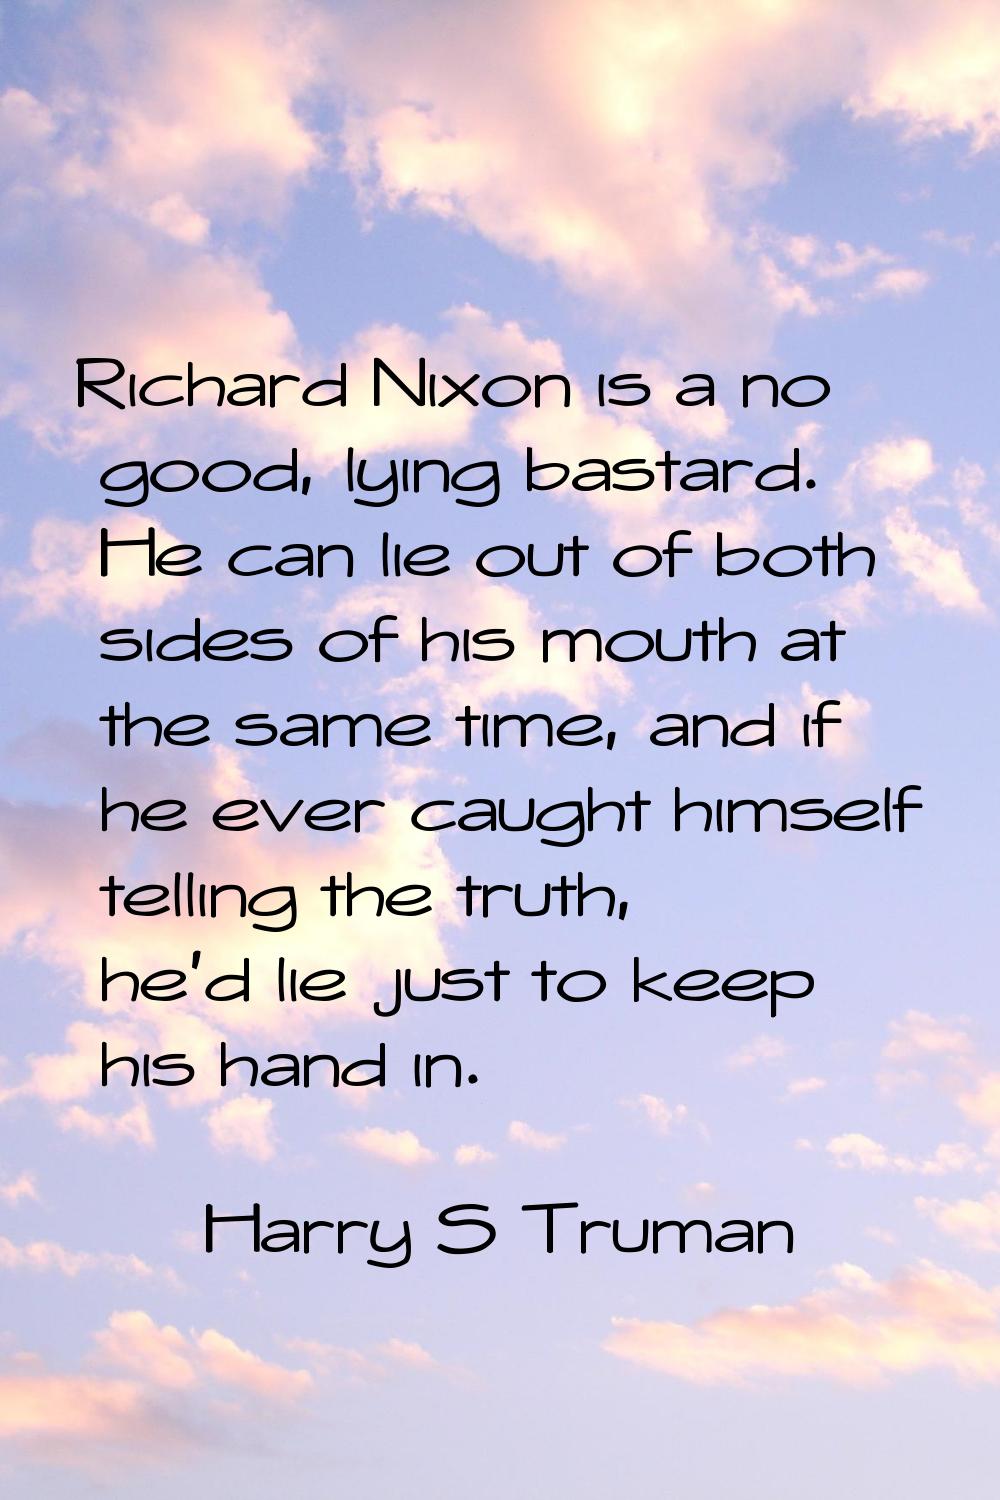 Richard Nixon is a no good, lying bastard. He can lie out of both sides of his mouth at the same ti